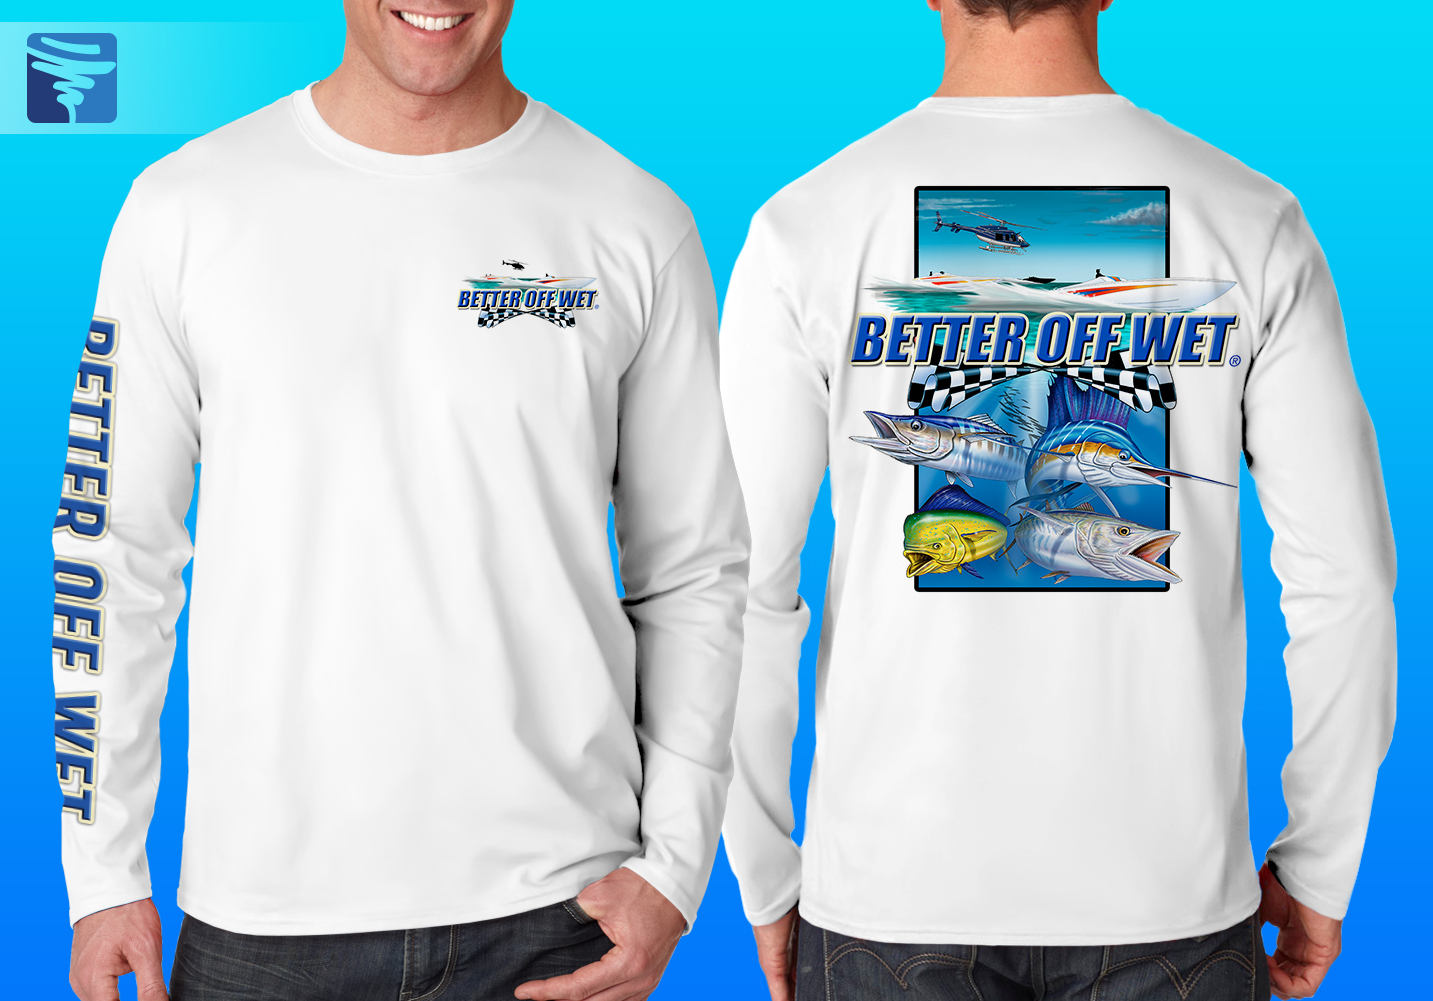 Fish Race Performance Shirt - Better Off Wet Water Lifestyle